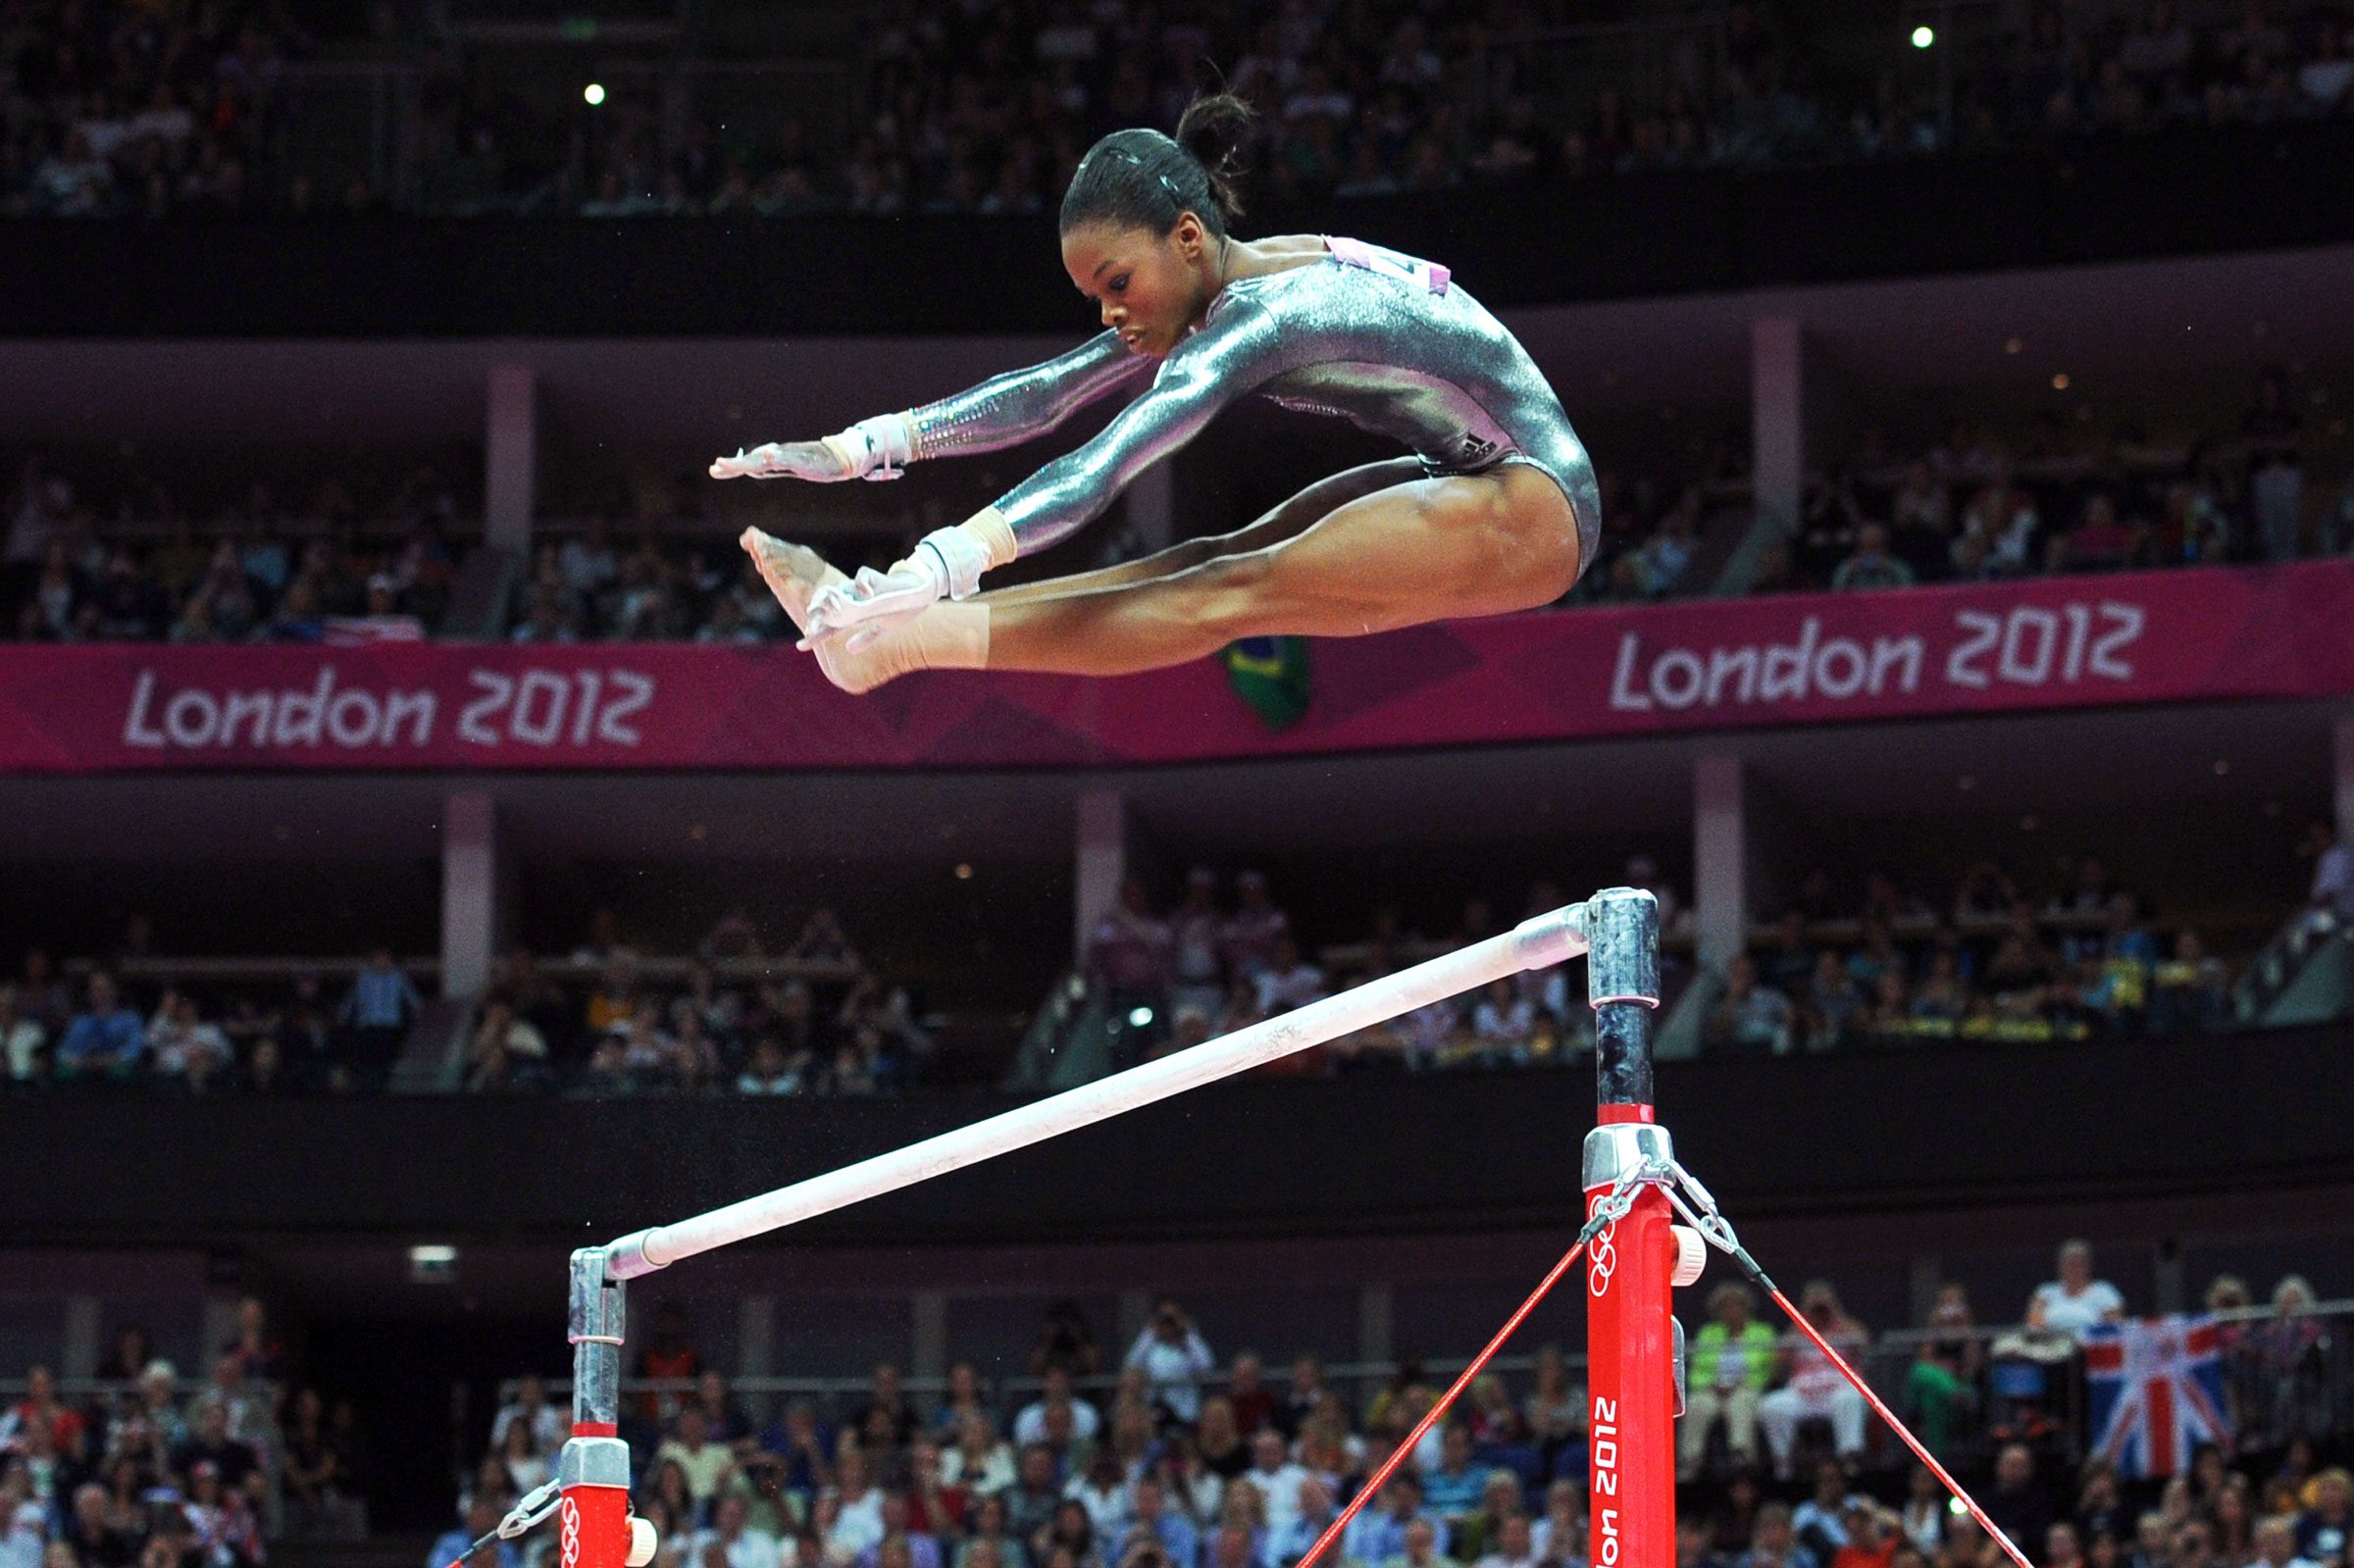 Gabrielle Douglas competes during the Artistic Gymnastics women's uneven bars final at the North Greenwich Arena, London